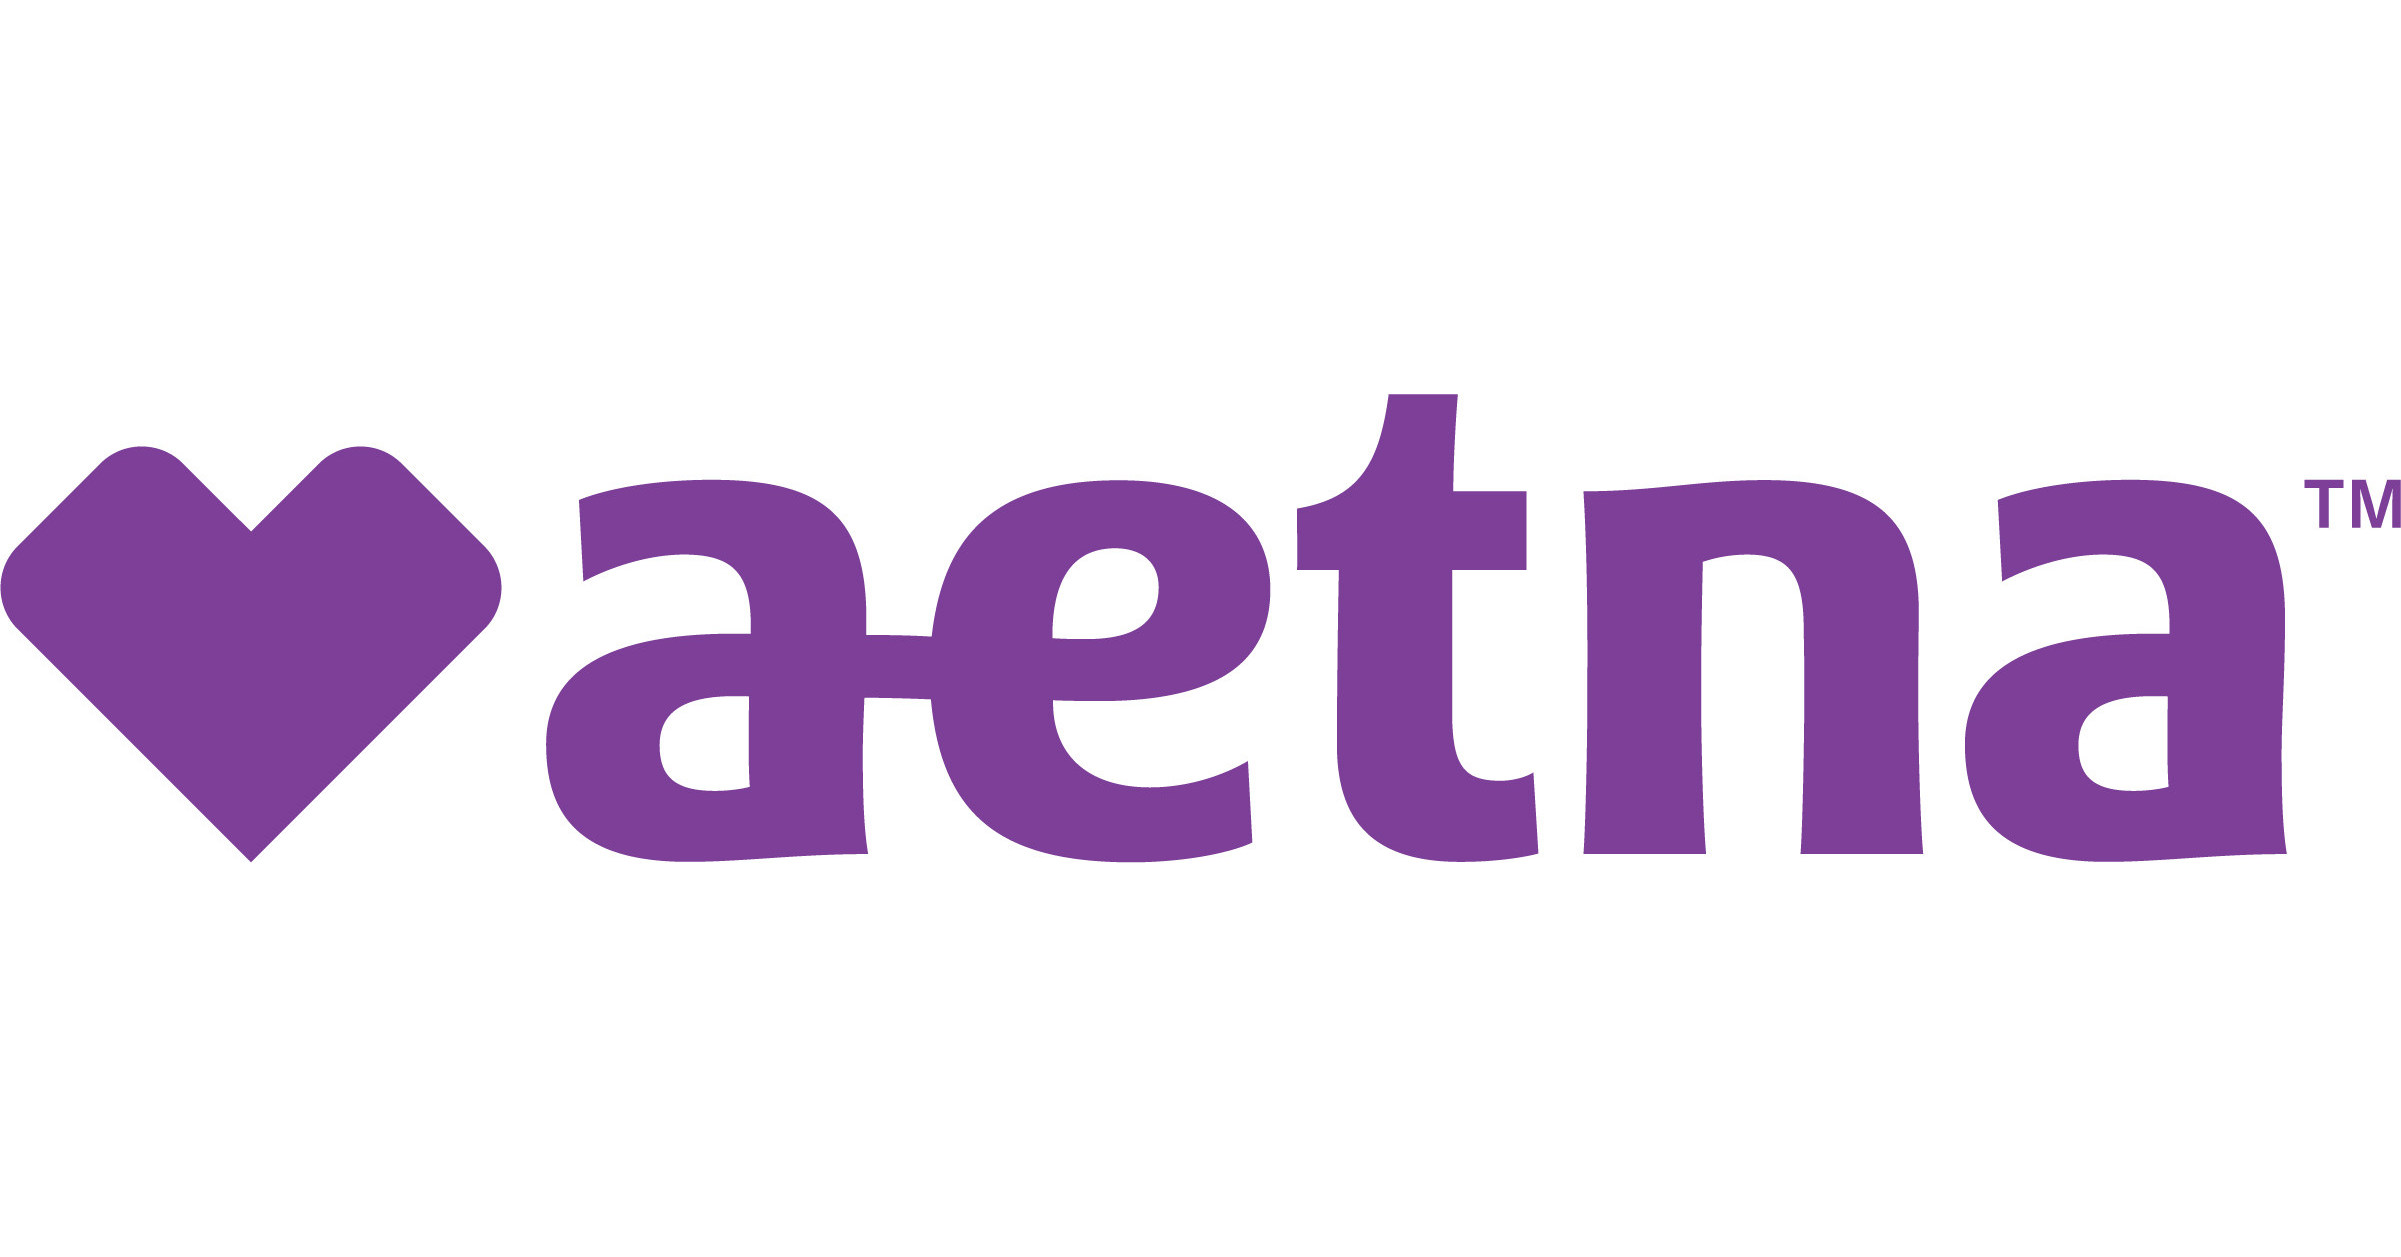 Aetna 2021 Medicare plans focus on total health and making care more affordable and convenient